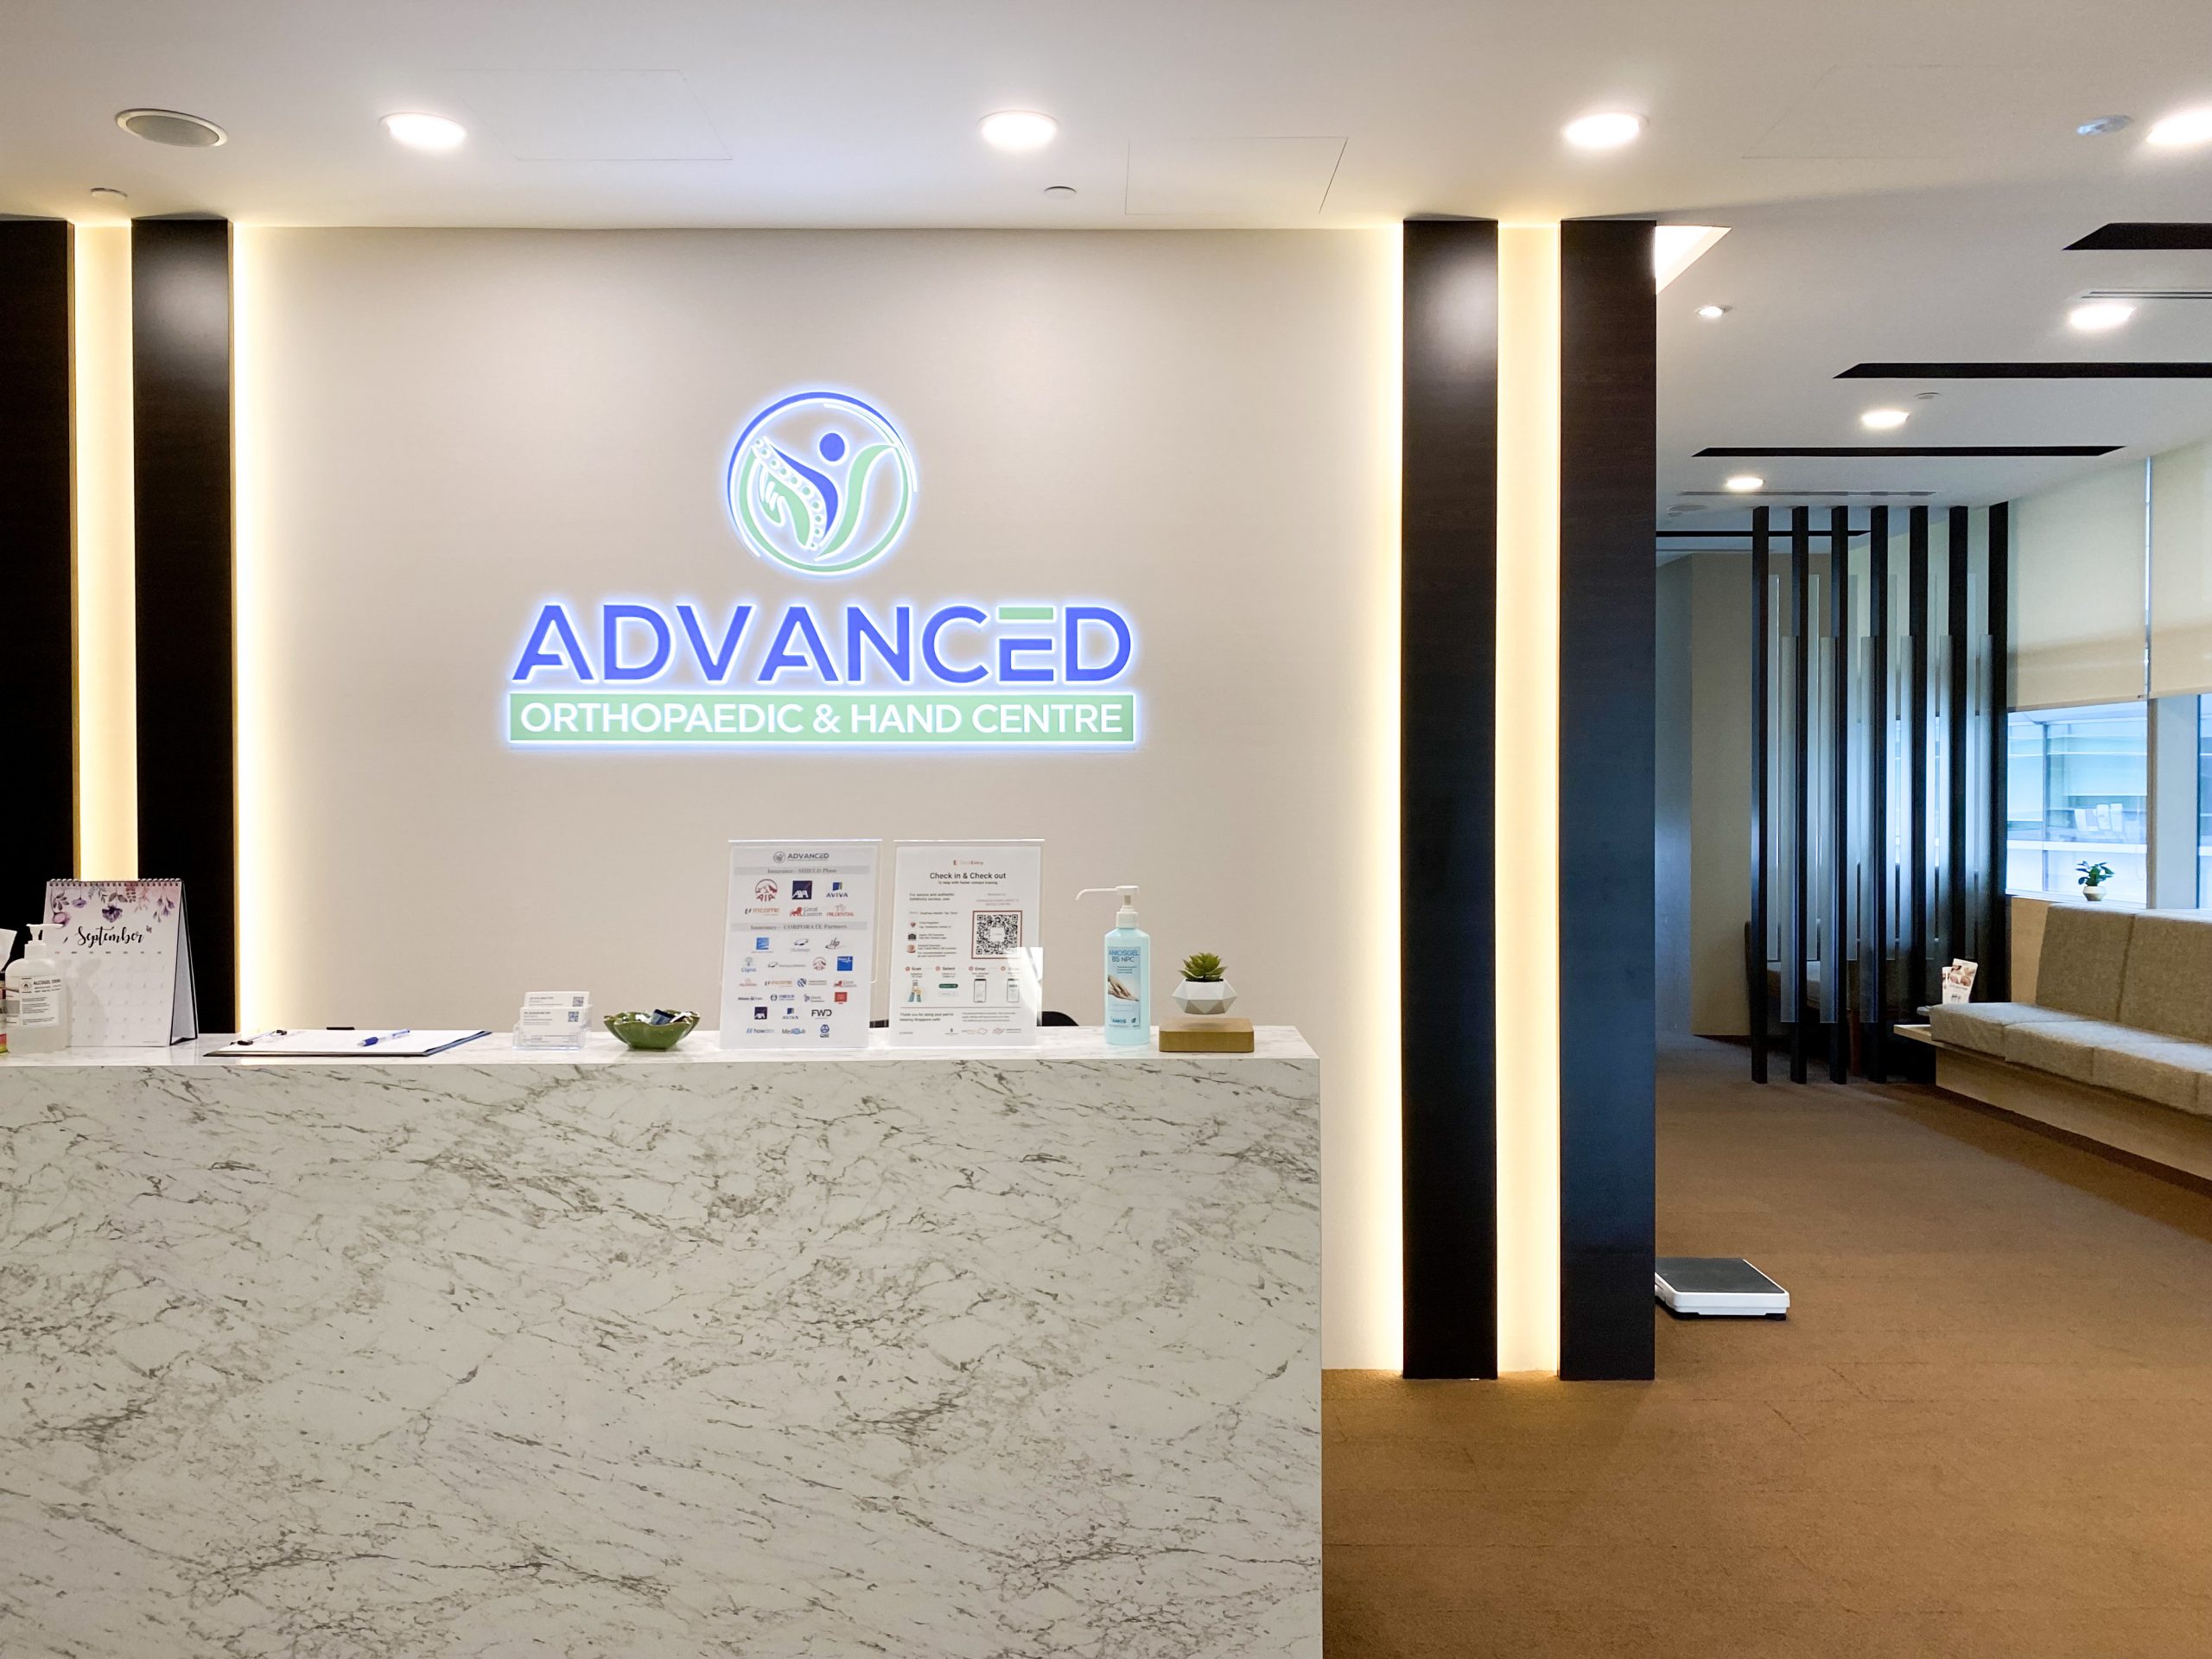 Empowering Precision Care for Hands, Wrist, and Nerves at the Advanced Hand, Wrist, and Nerve Centre.